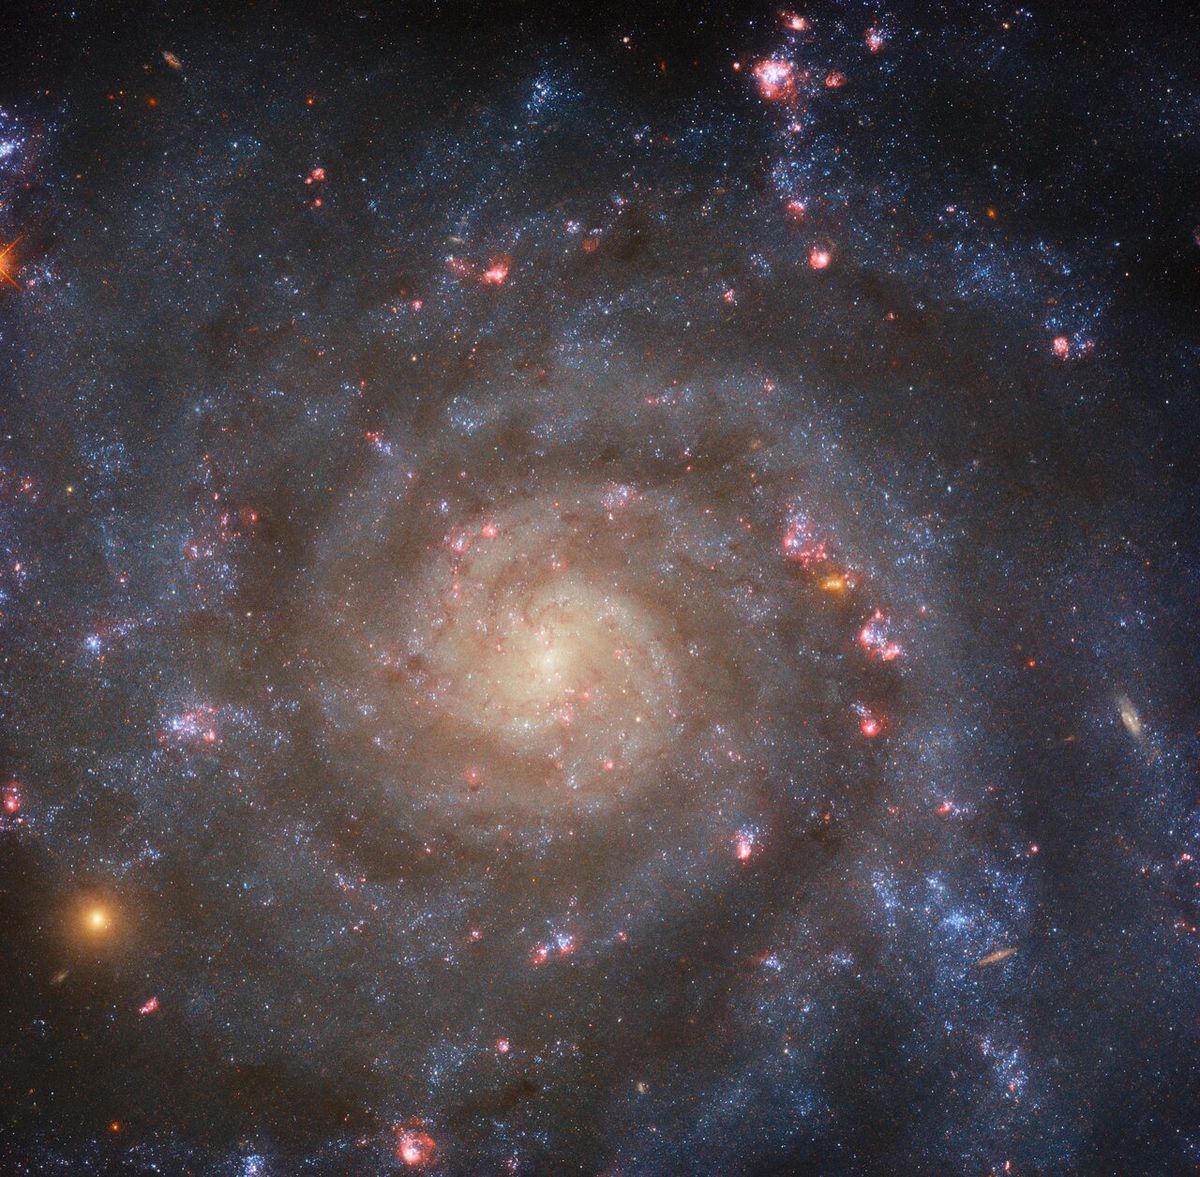 Hubble telescope captures a swirling spiral galaxy (photo)